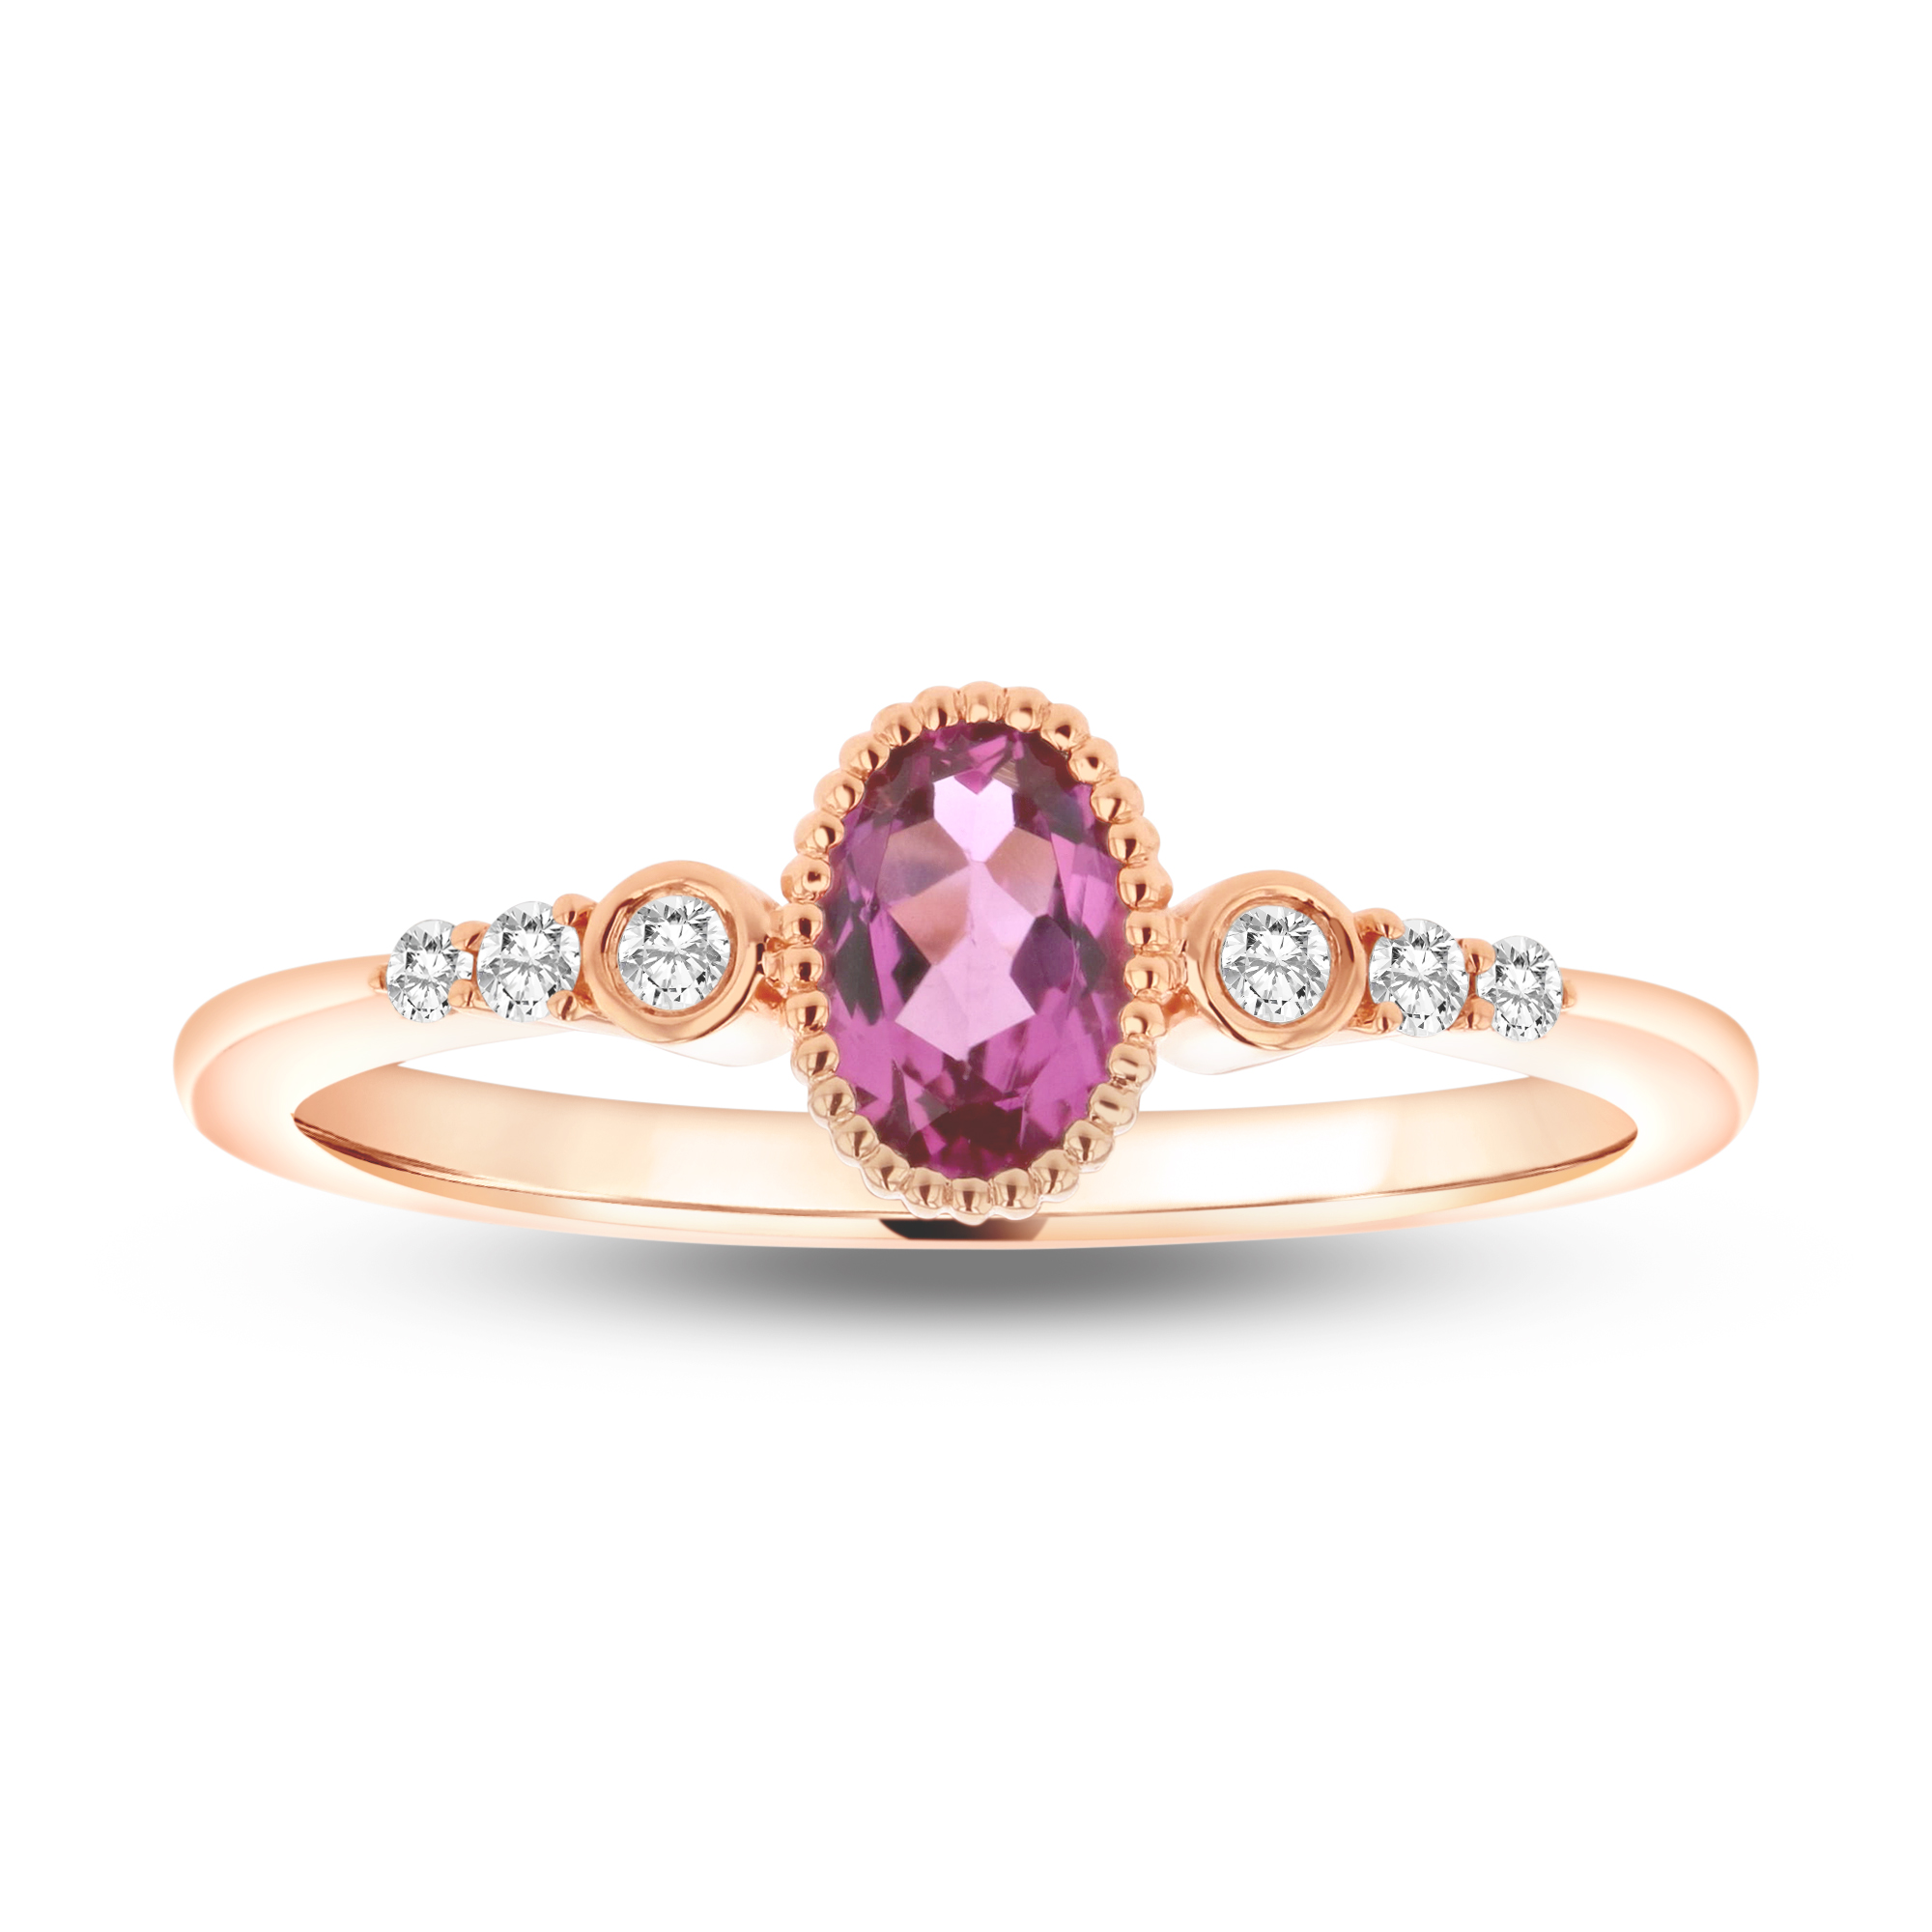 View 0.08ctw Diamond and Pink Toumaline Ring in 14k Rose Gold